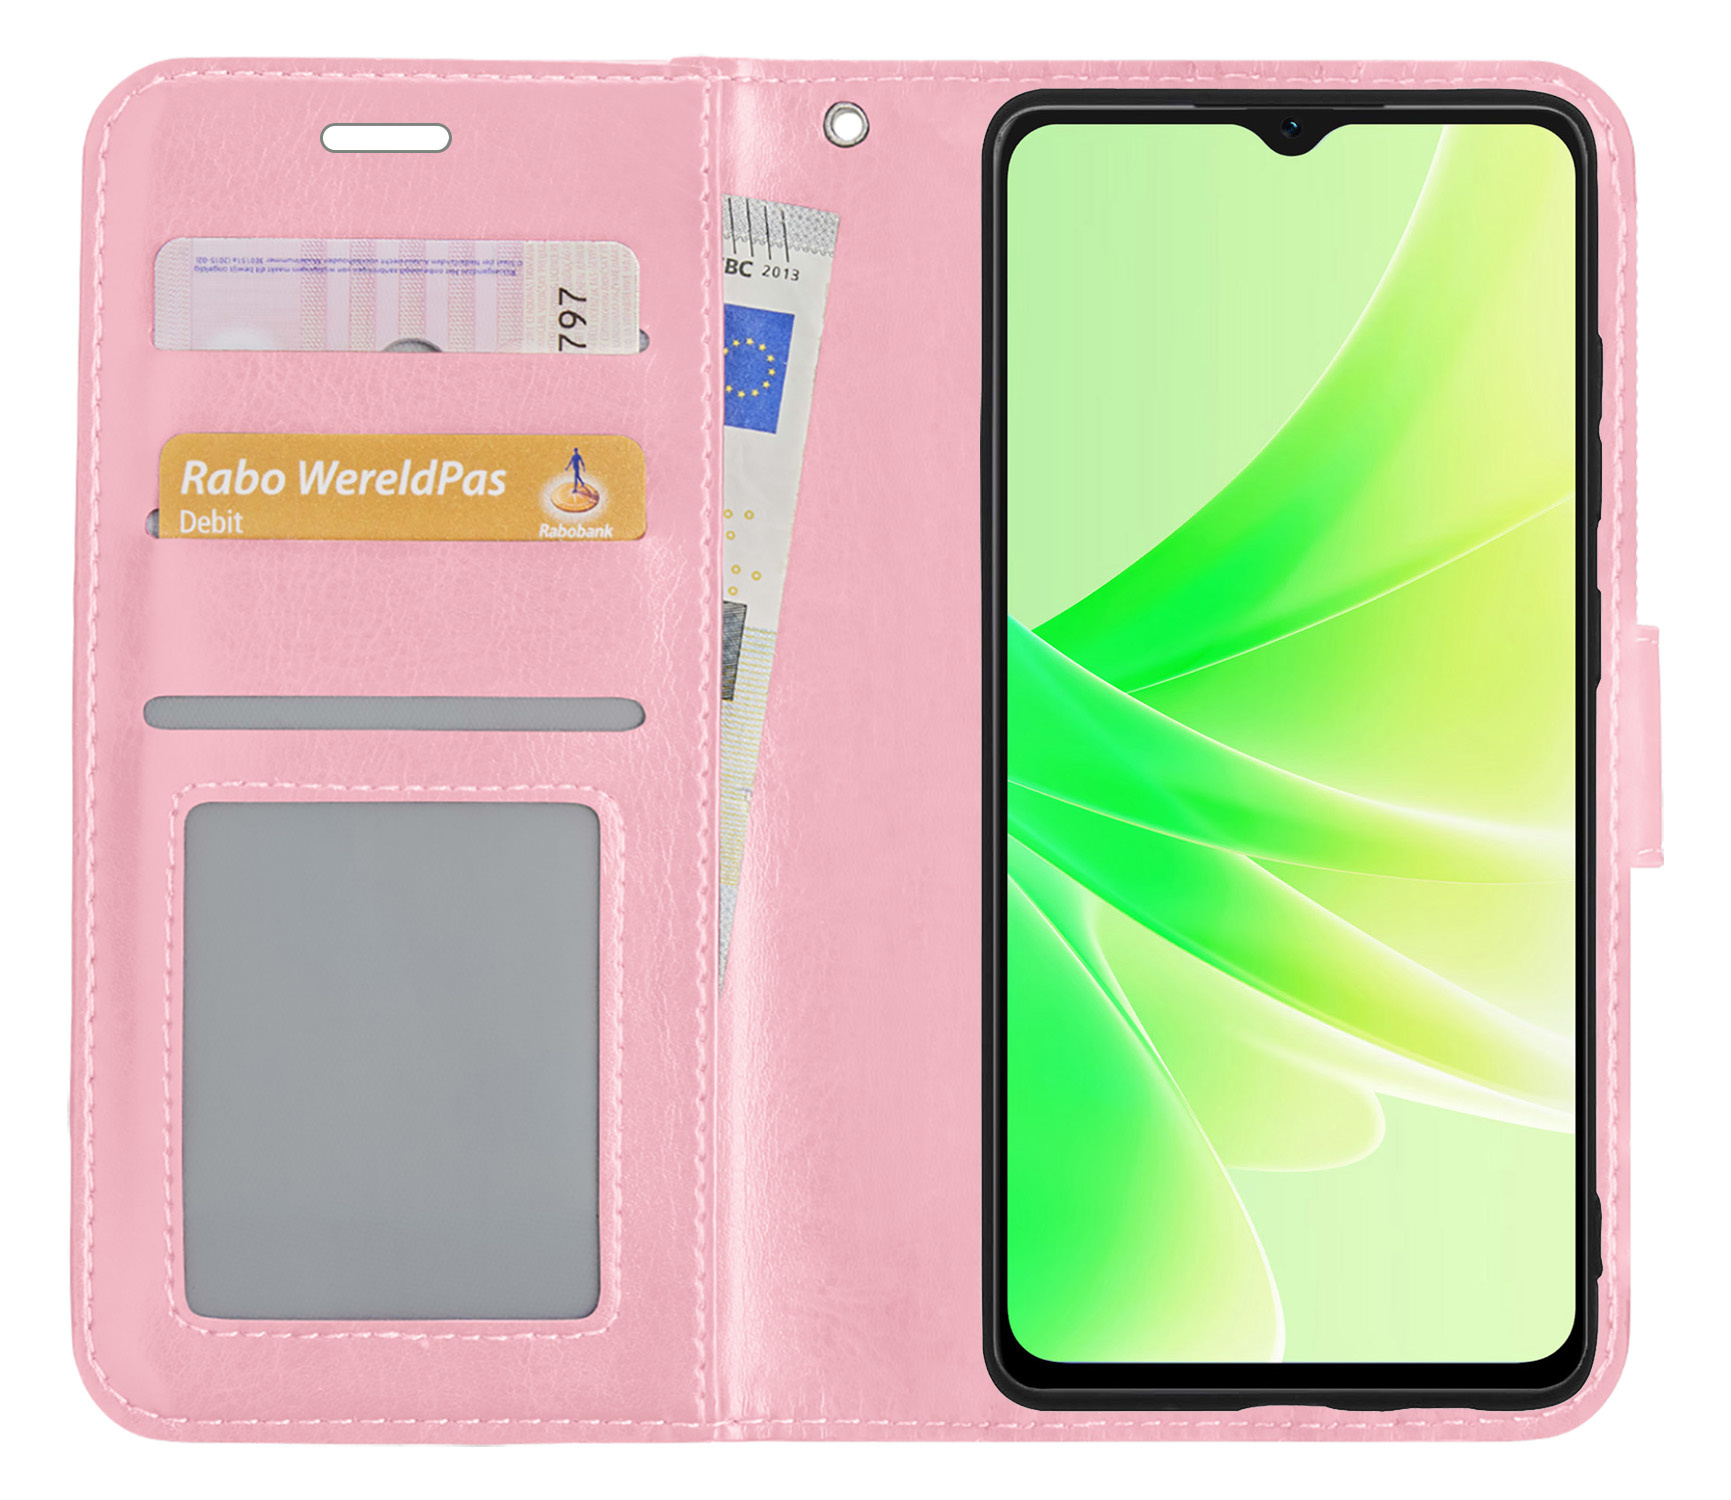 Nomfy OPPO A17 Hoes Bookcase Flipcase Book Cover Met 2x Screenprotector - OPPO A17 Hoesje Book Case - Lichtroze